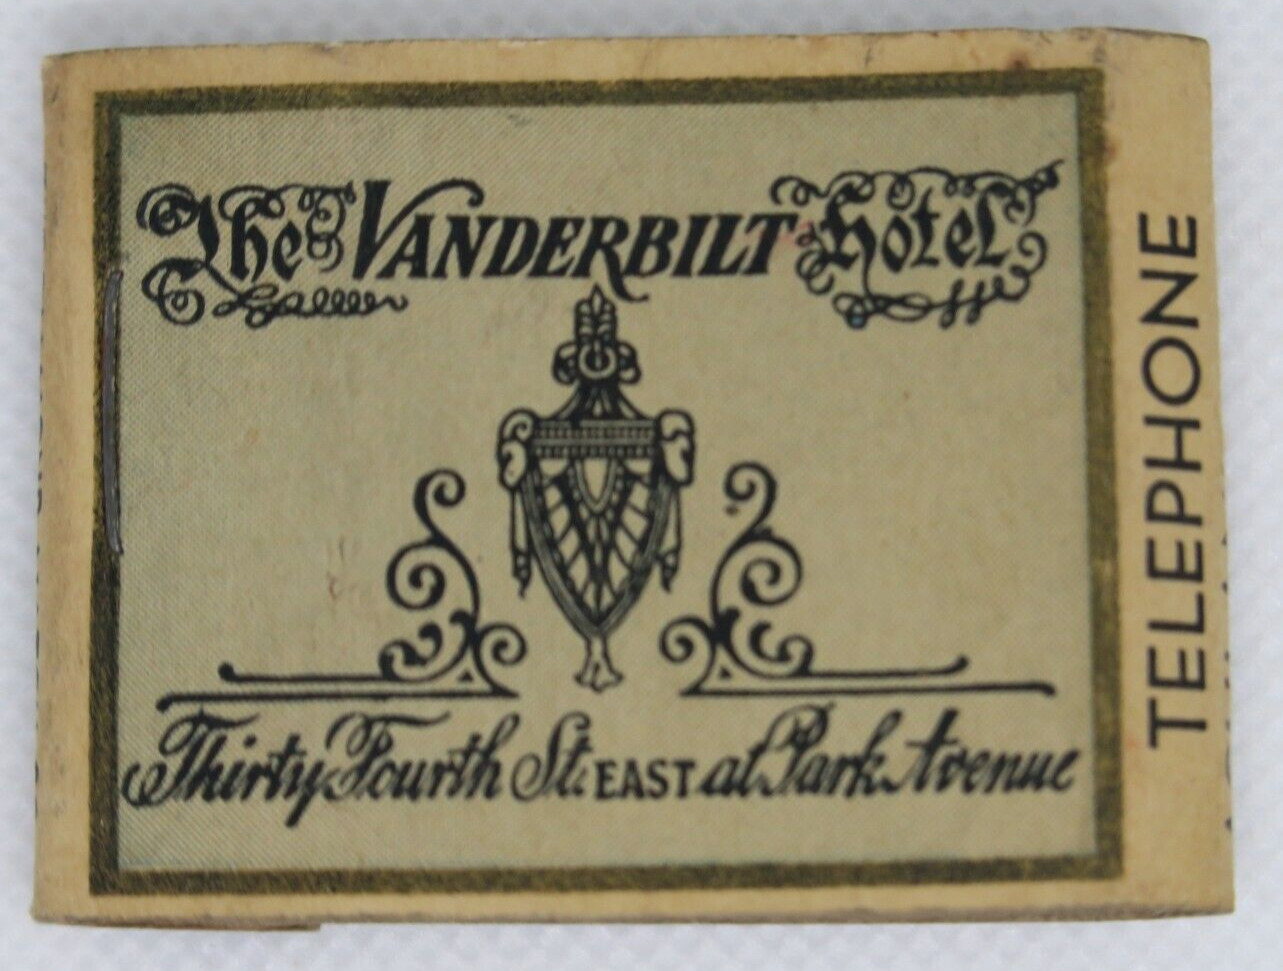 The Vanderbilt Hotel Thirty Fourth East of Park NYC NY Empty Matchbook Cover